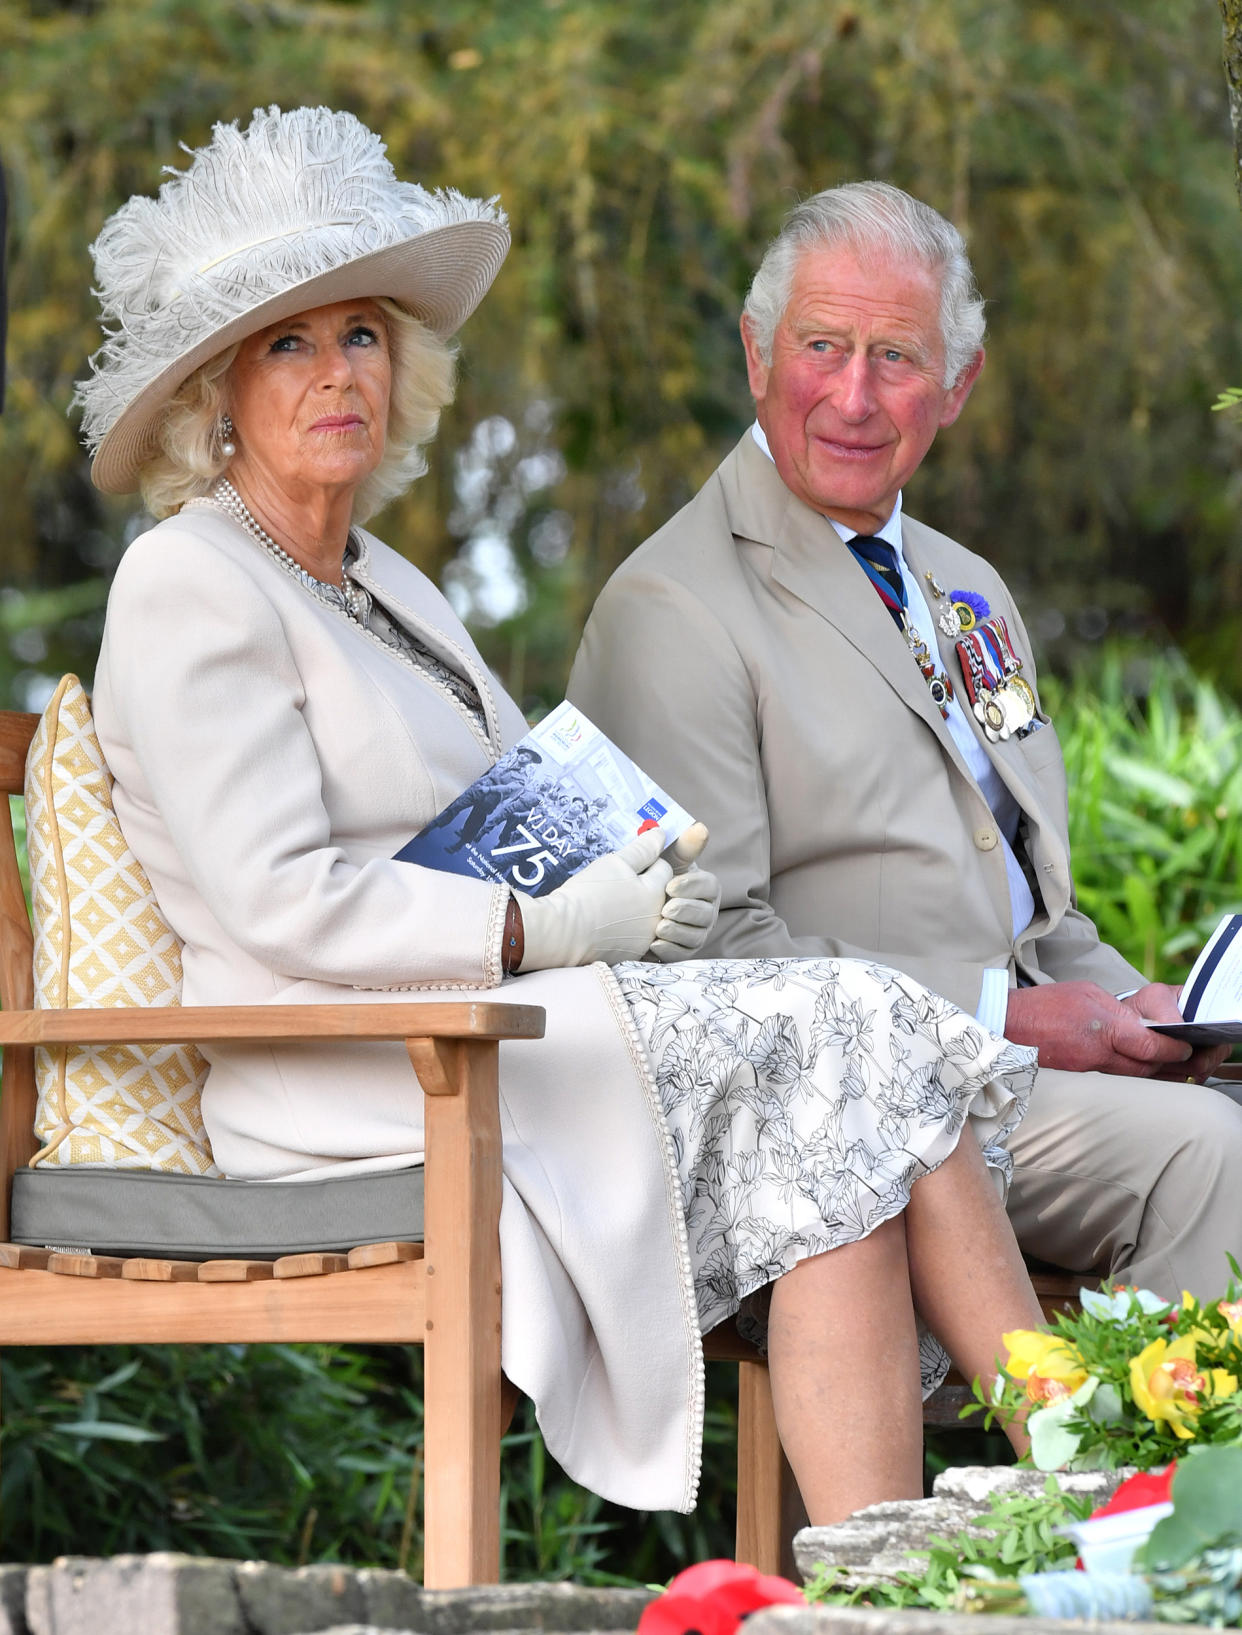 The Prince Of Wales And The Duchess Of Cornwall Attend A National Service Of Remembrance Marking The 75th Anniversary Of VJ Day (Anthony Devlin / Getty Images)